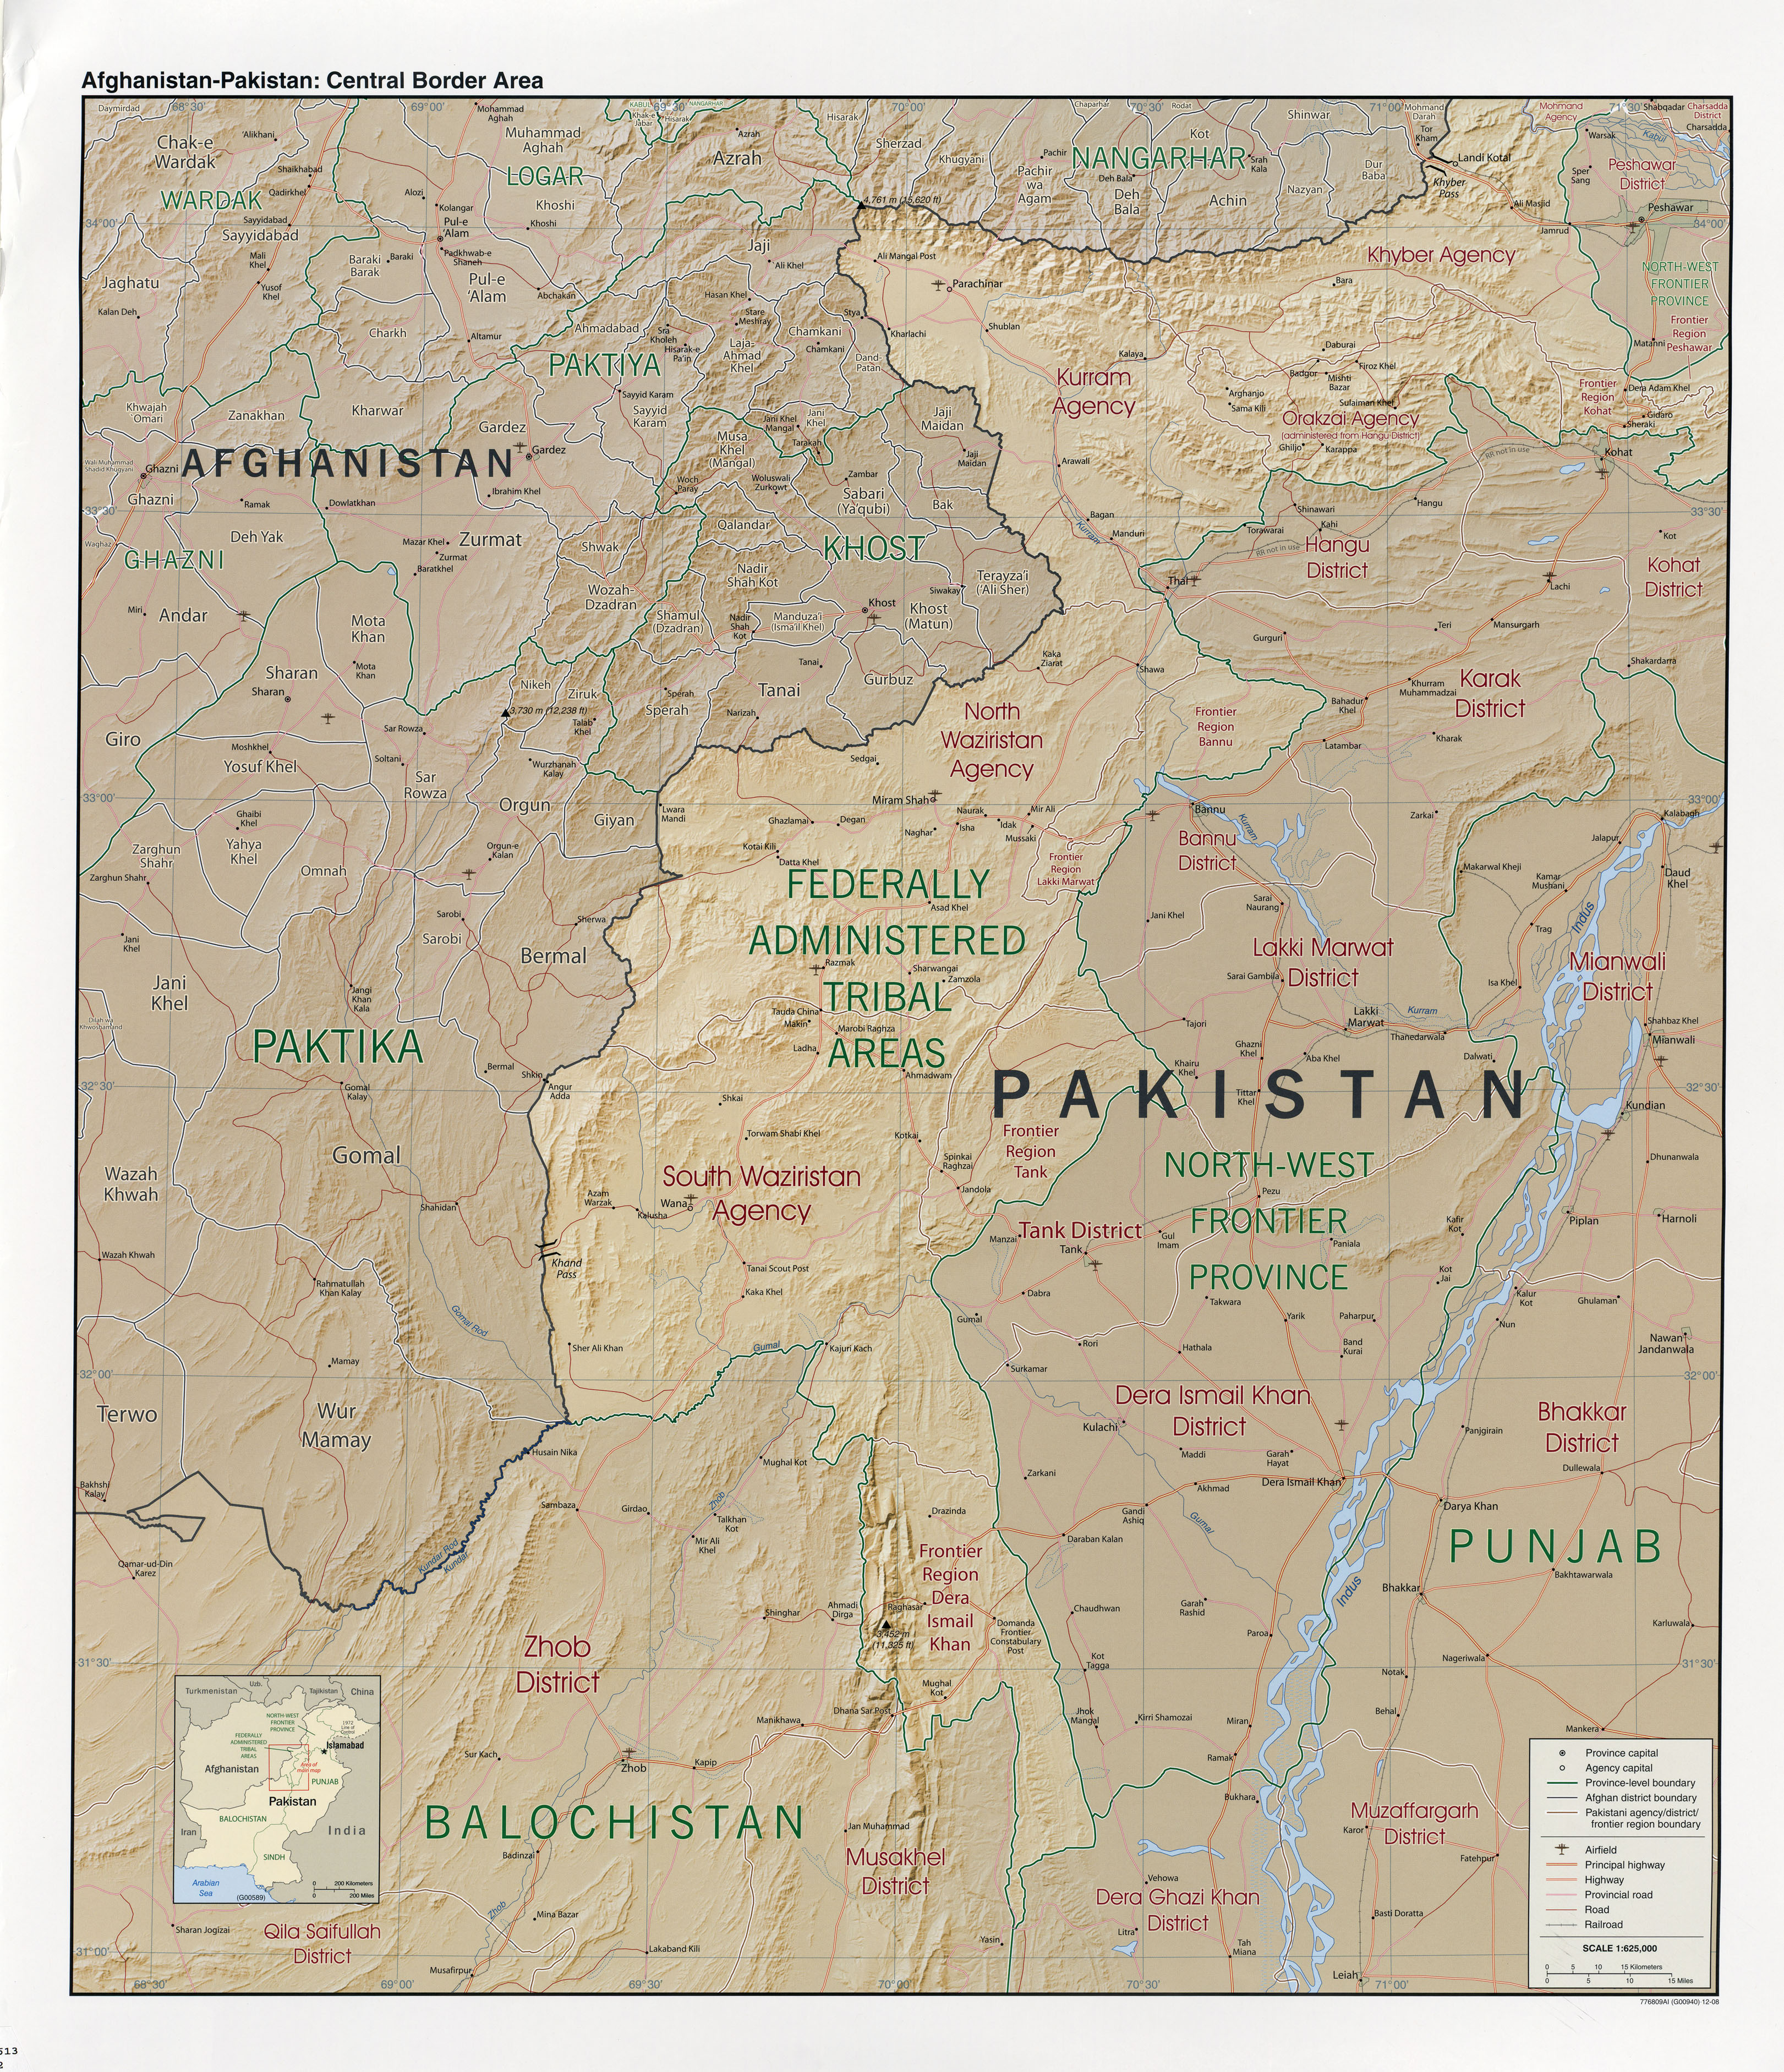 Federally Administered Tribal Areas - Wikipedia